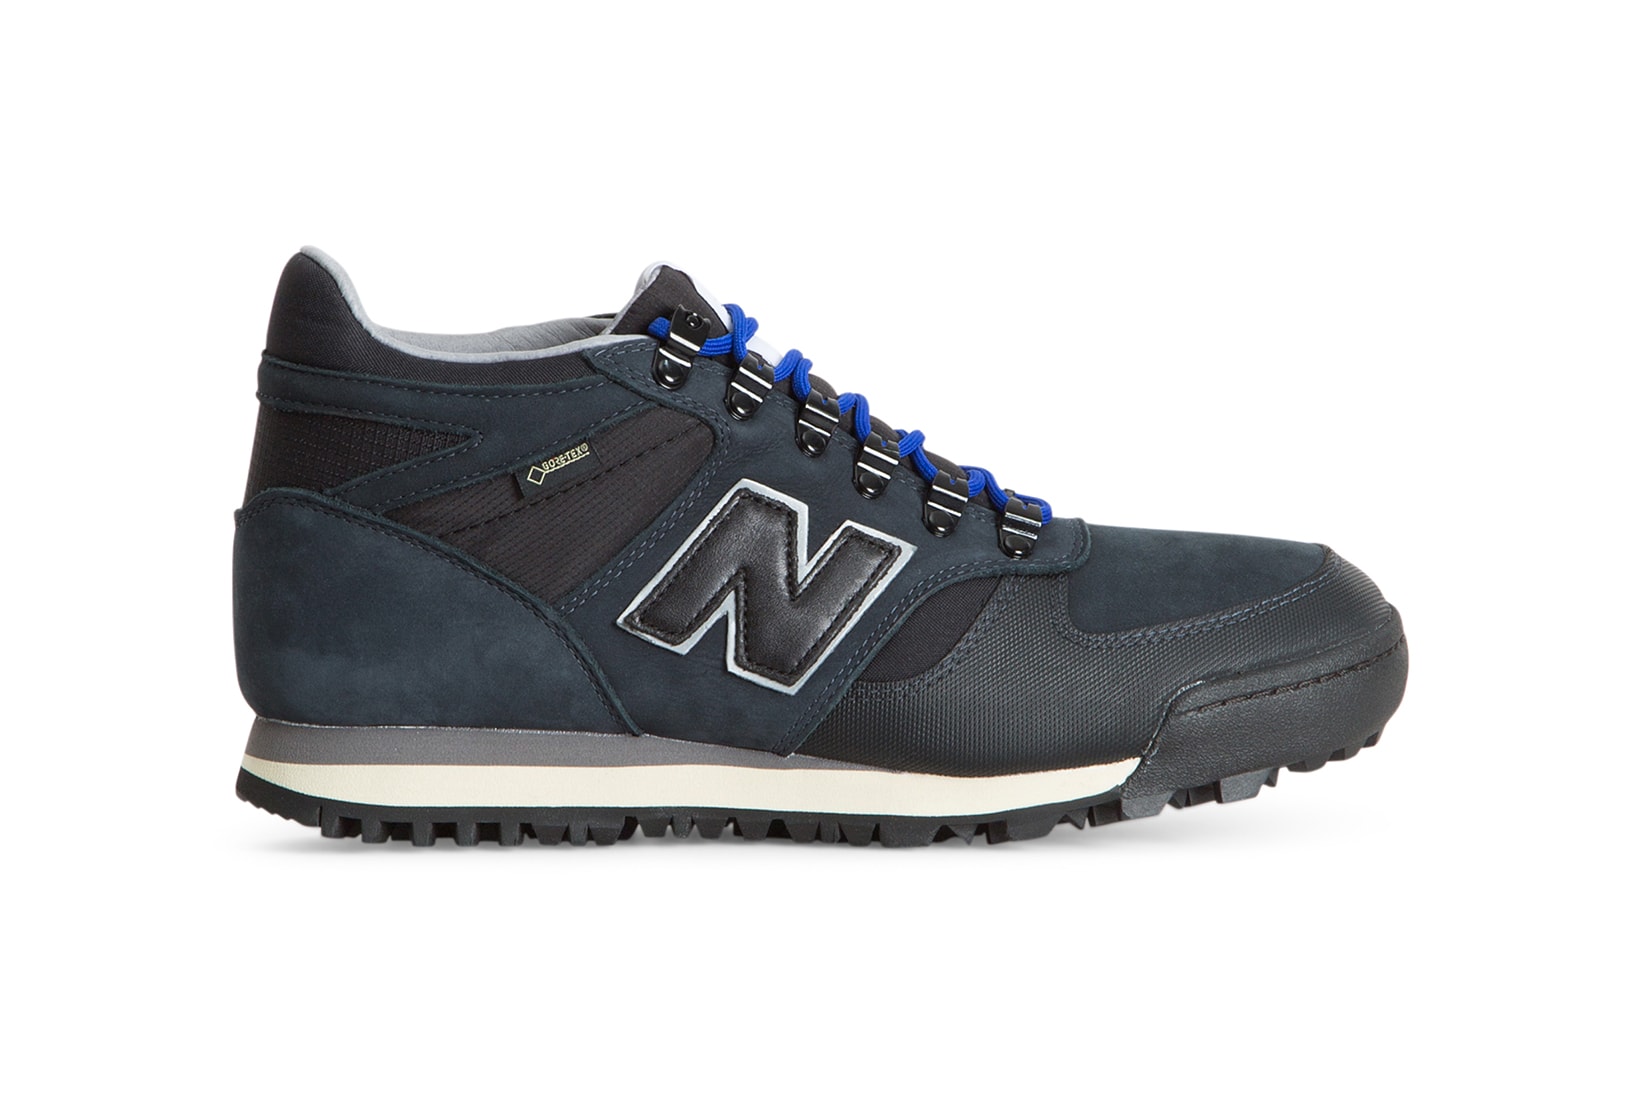 Norse Projects New Balance Rainier Danish Weather Pack